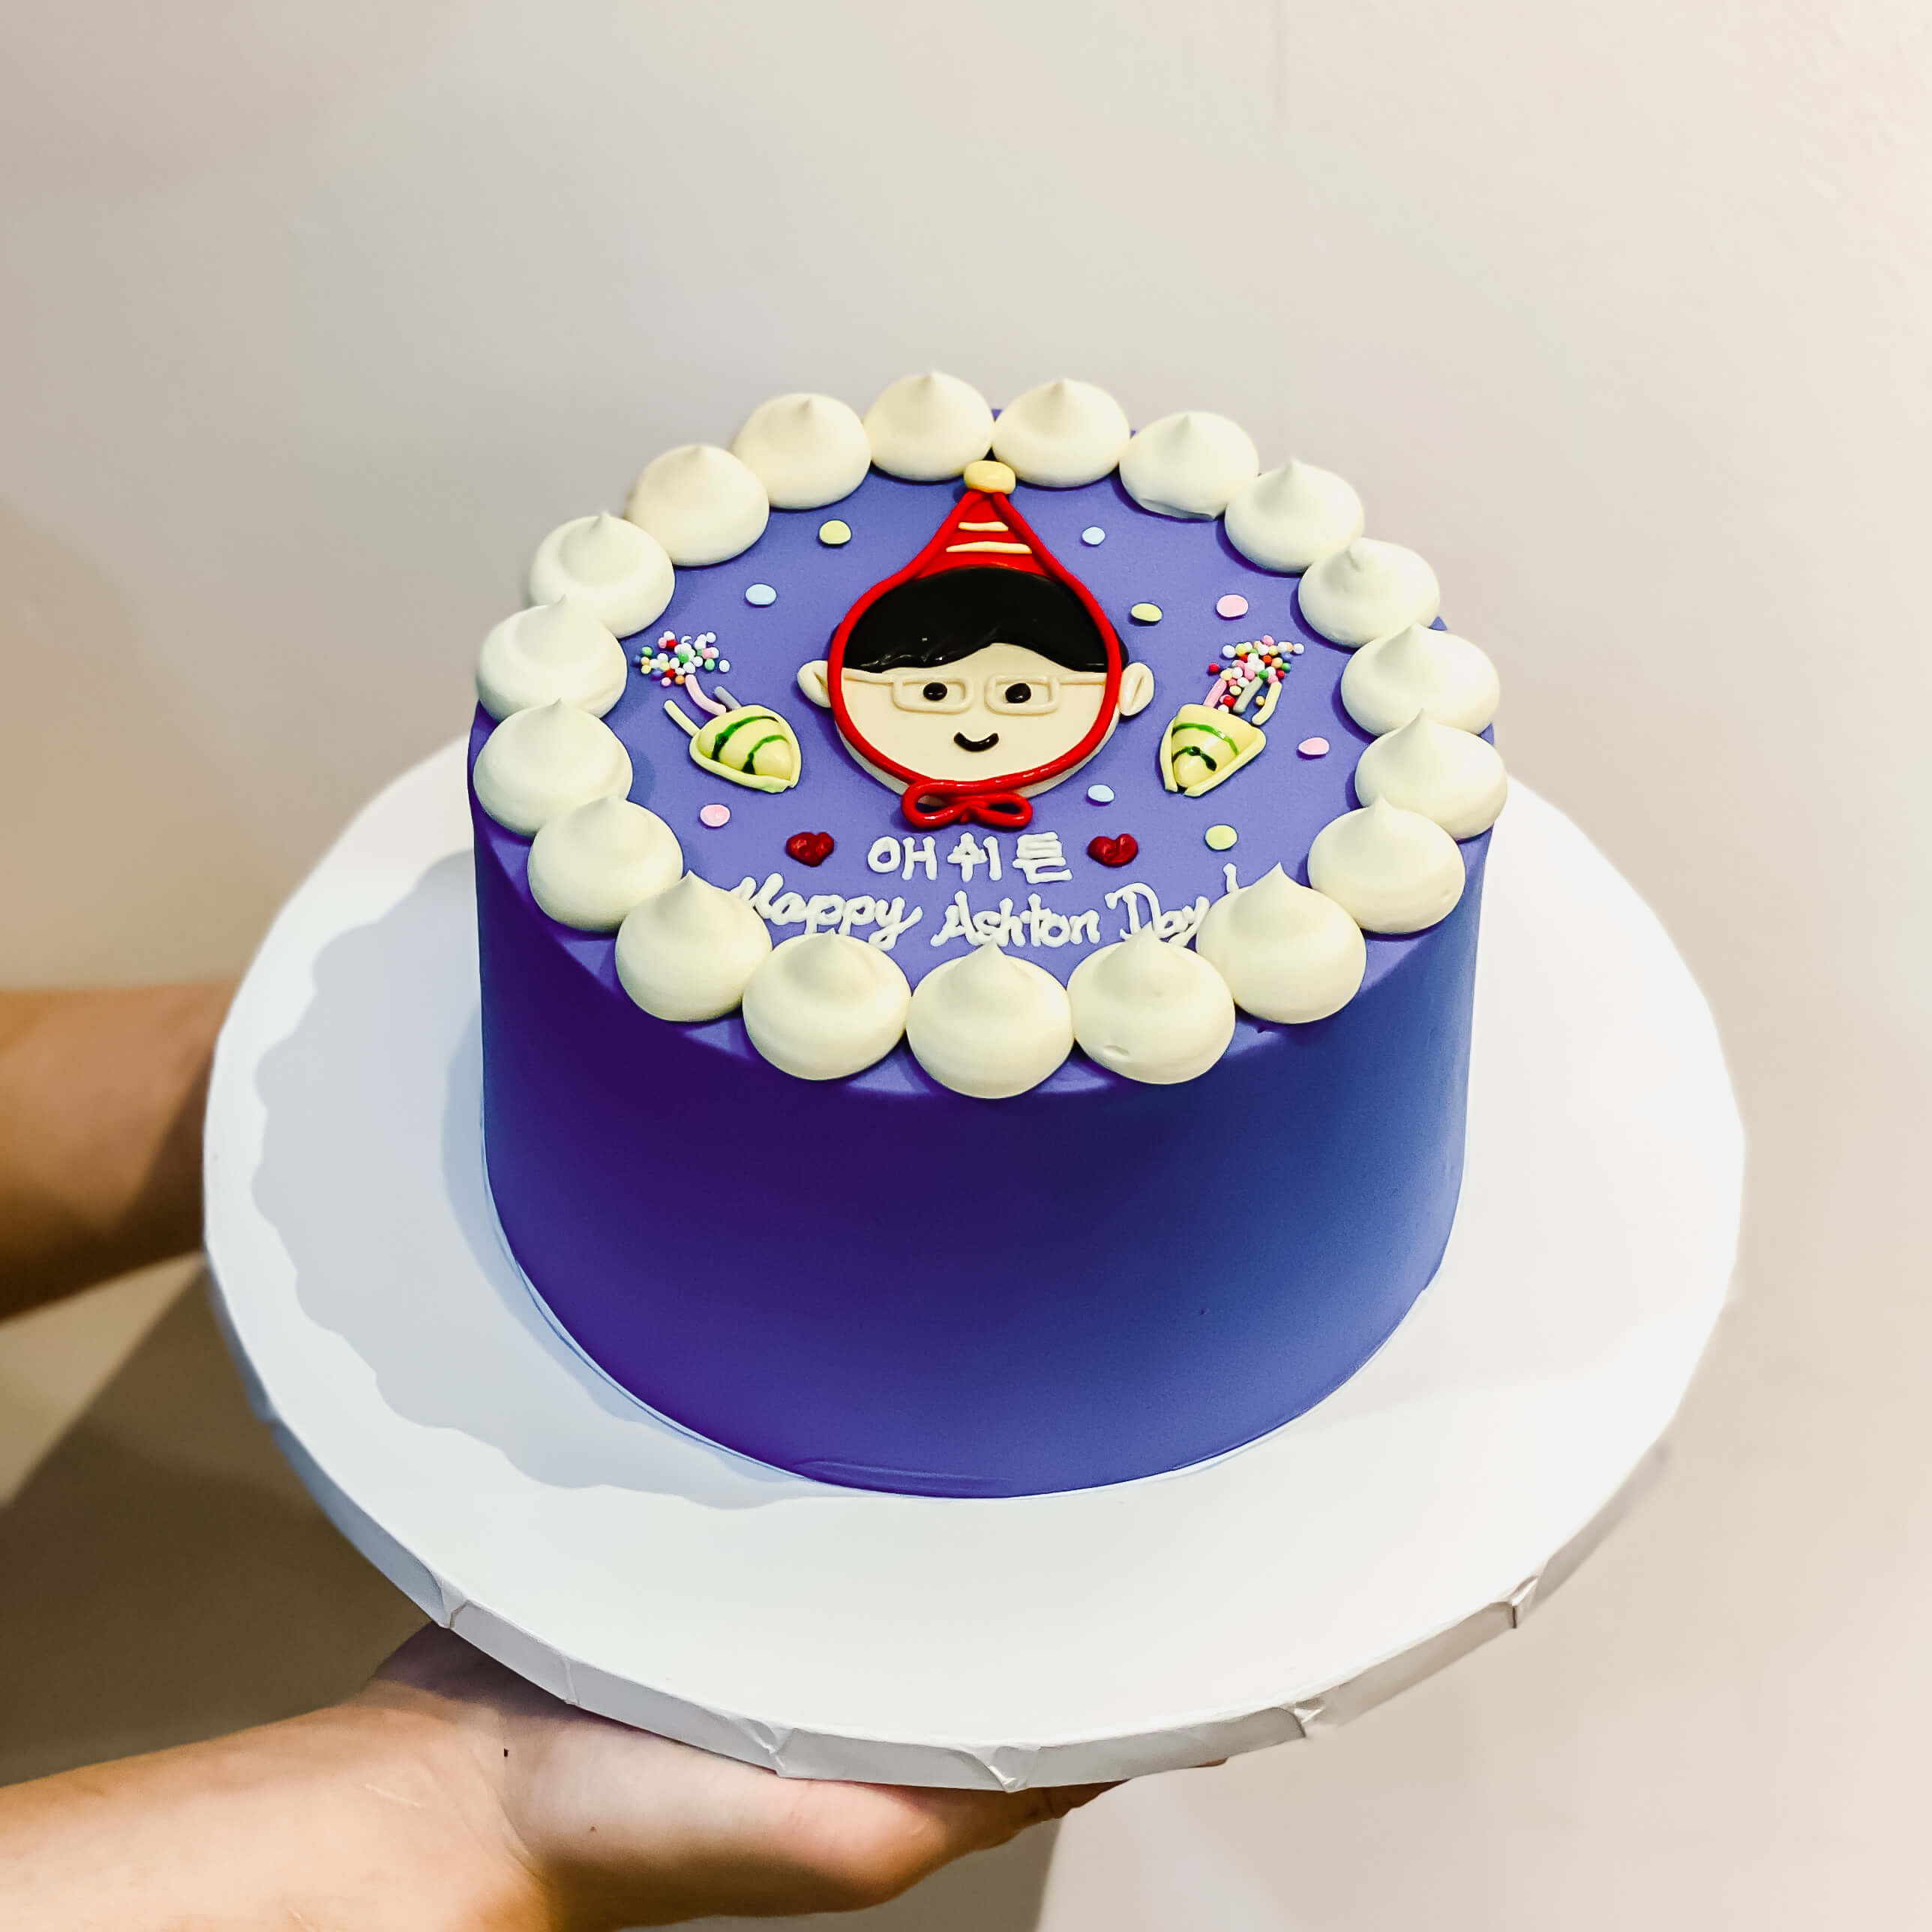 Korean Minimalistic Cake with Boy in Party Hat